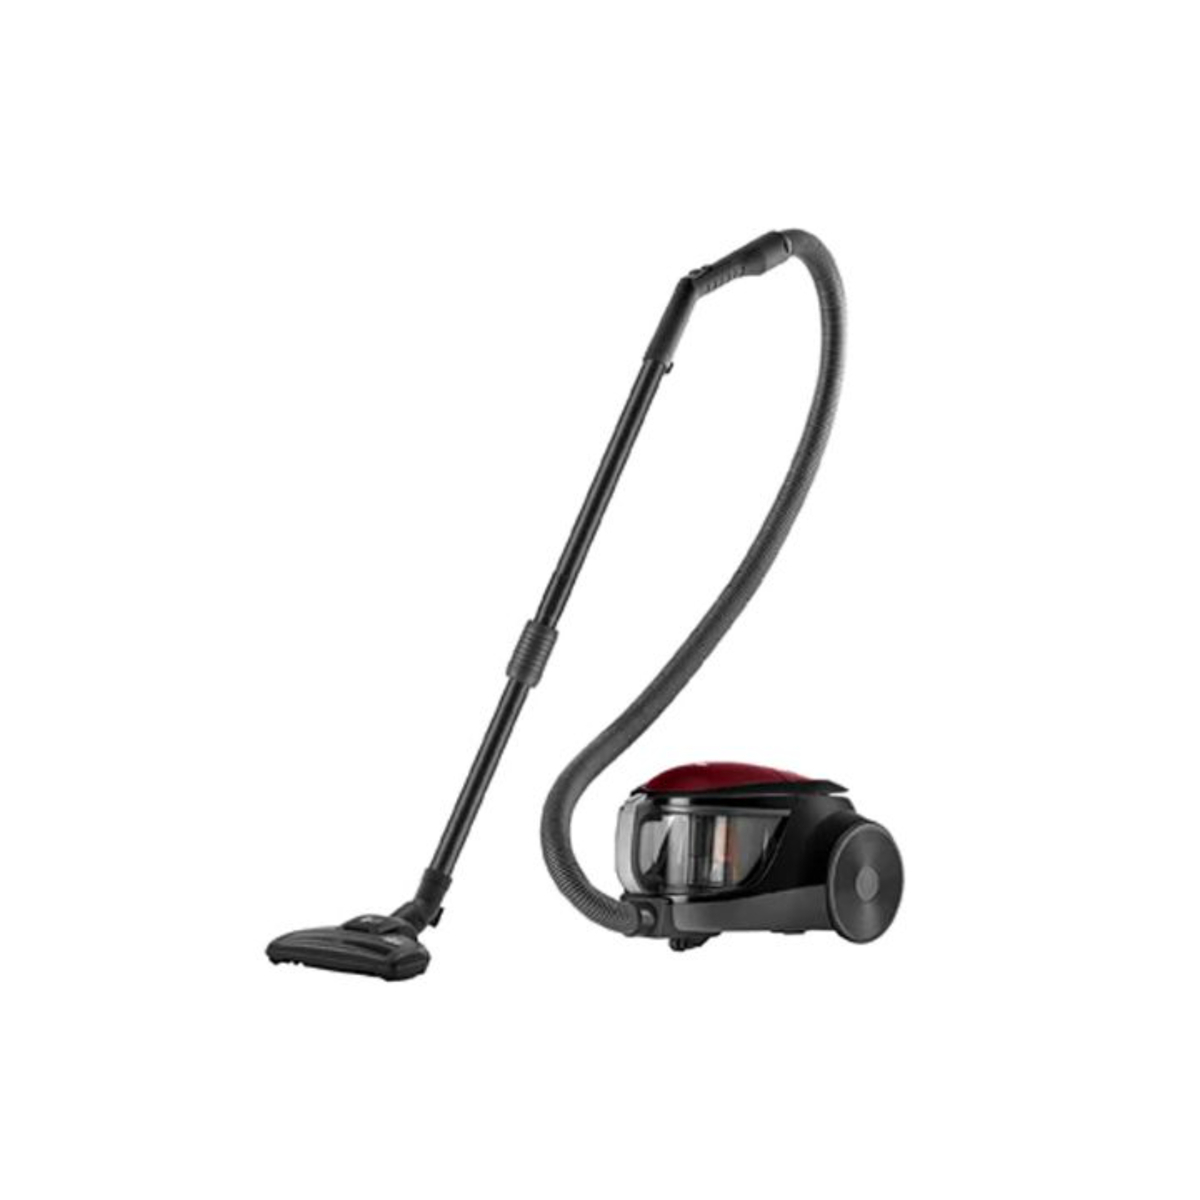 LG Canister Vacuum Cleaner, 1.3 L, 1800 W, Black Red, VC5418NNTR